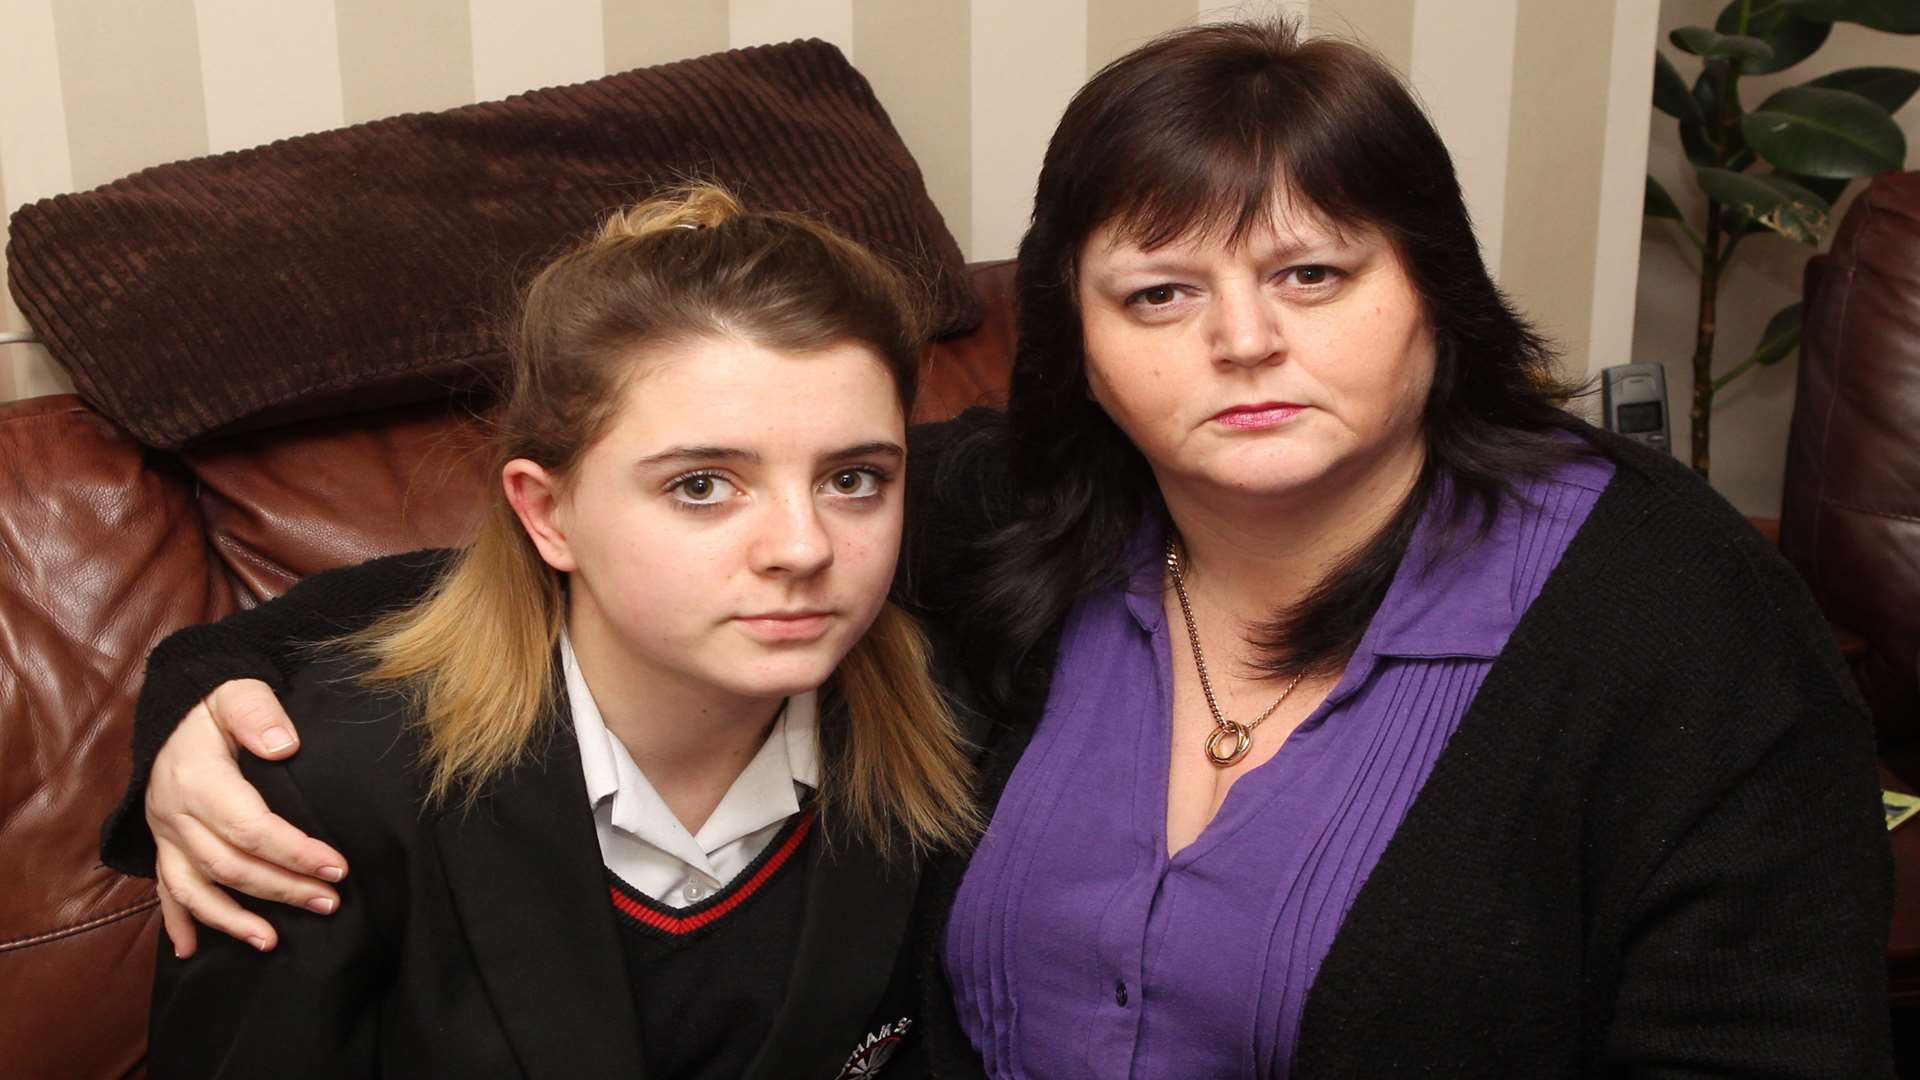 Katy Webb, 14, who was attacked by a group of girls, with her mum Sara